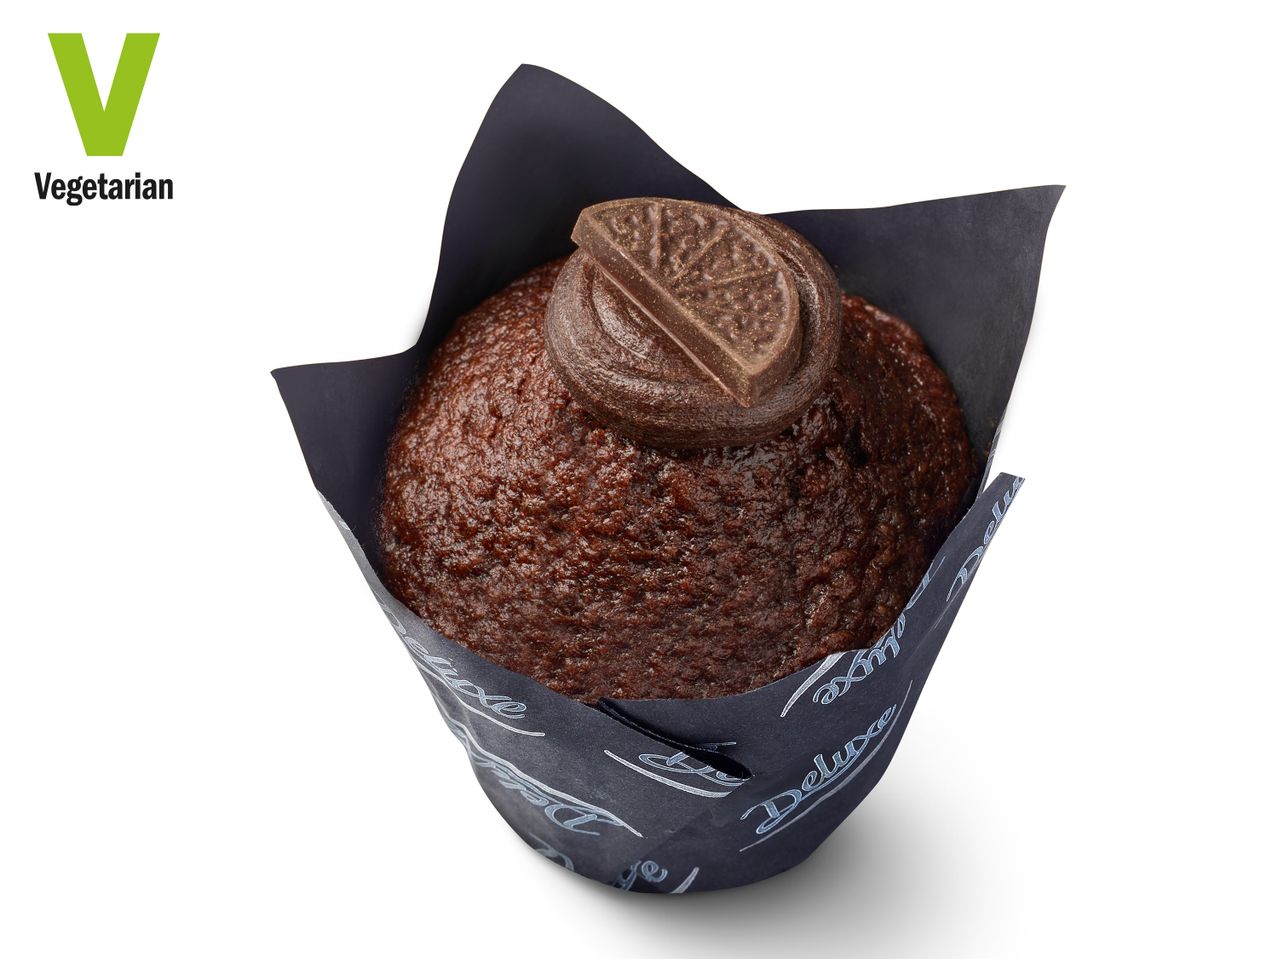 Go to full screen view: Premium Filled Muffins - Chocolate Orange / Speculoos - Image 2